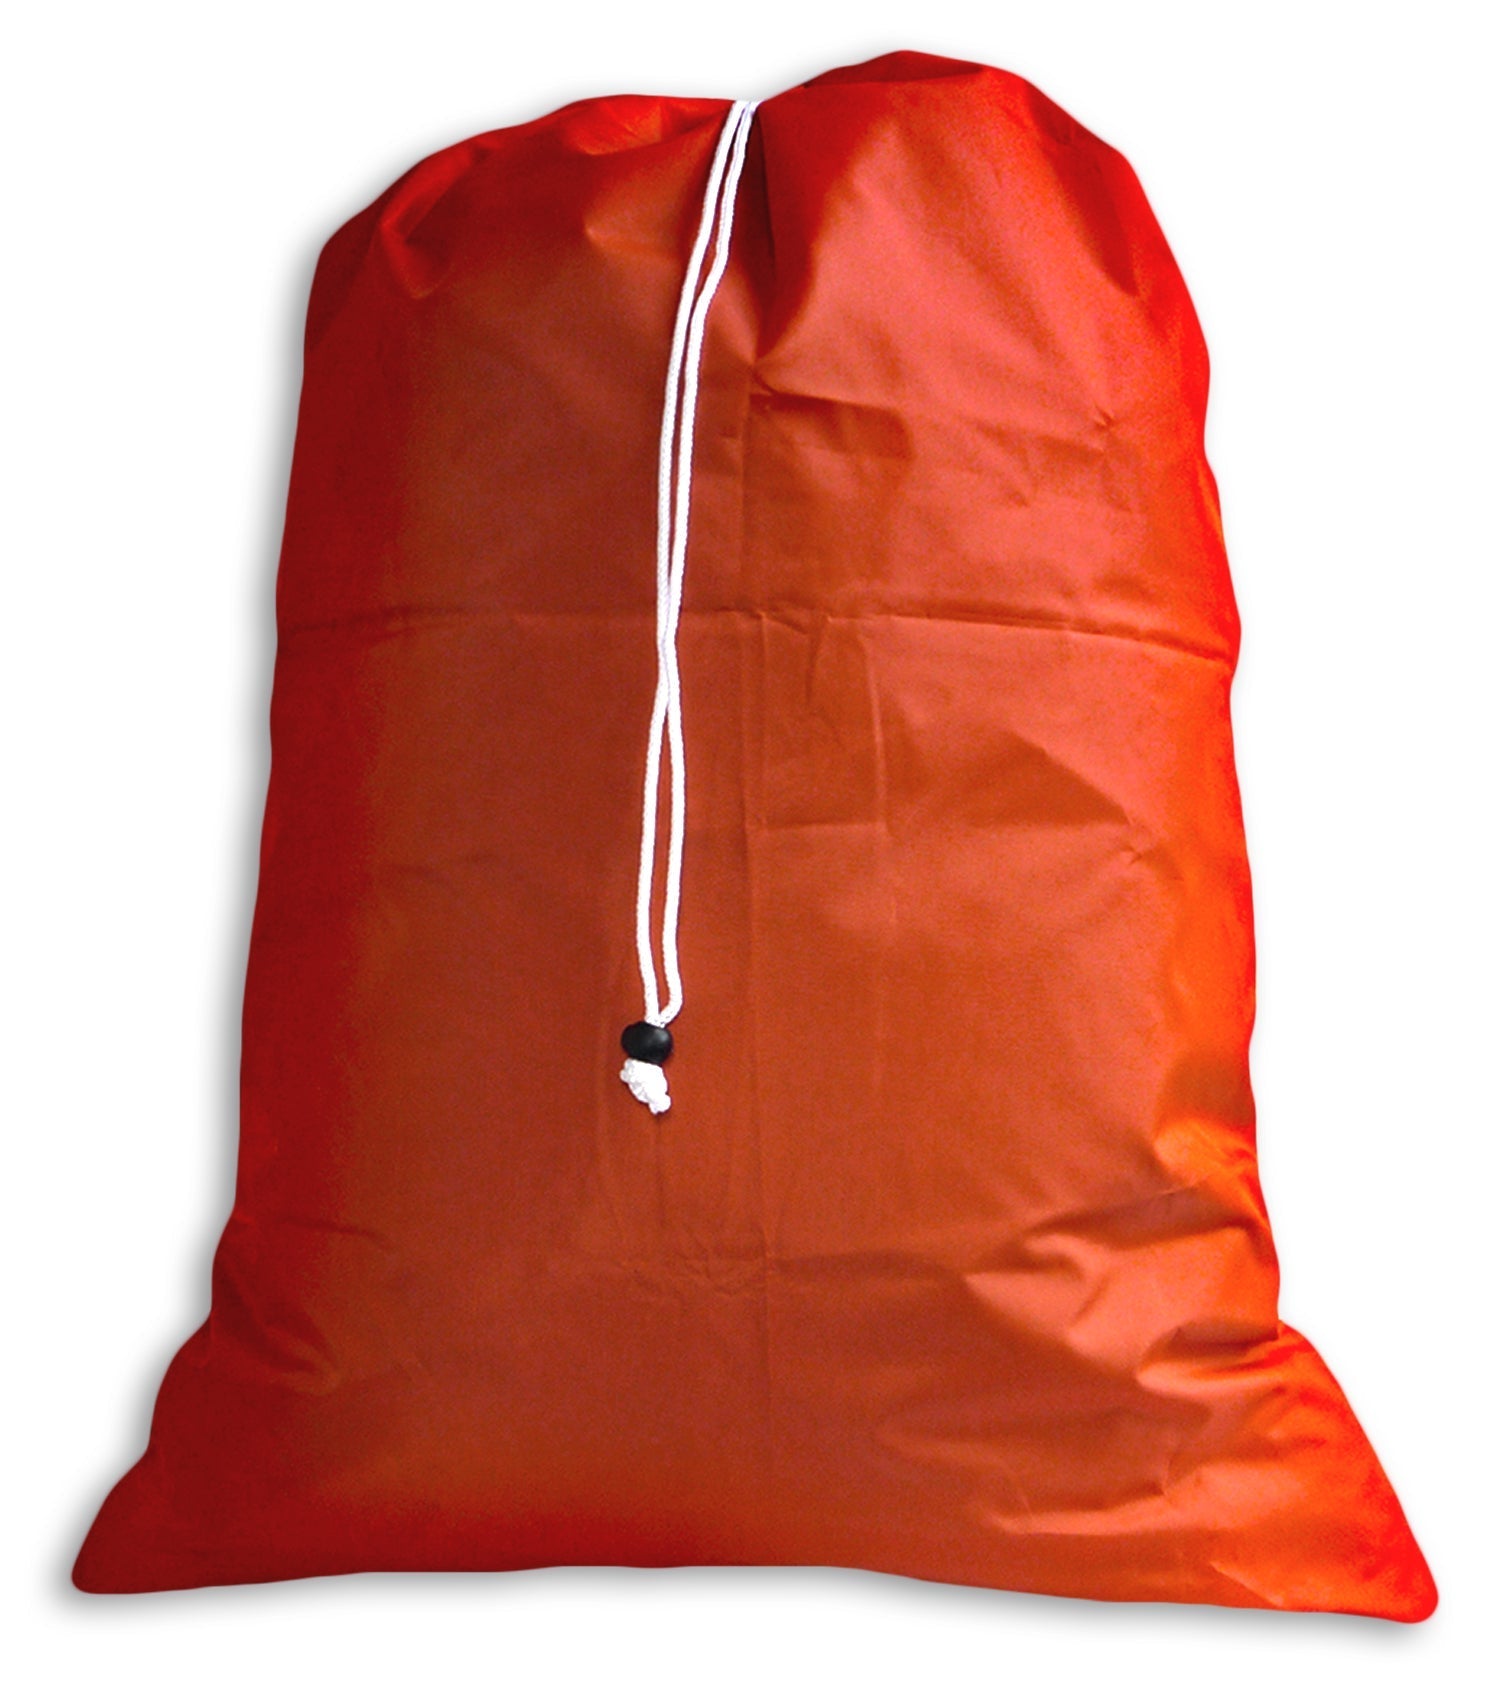 Small Laundry Bag, Drawstring, Carry Strap, Lock Closure, Color: Black,  Size: 22x28, Pick from 16 Colors